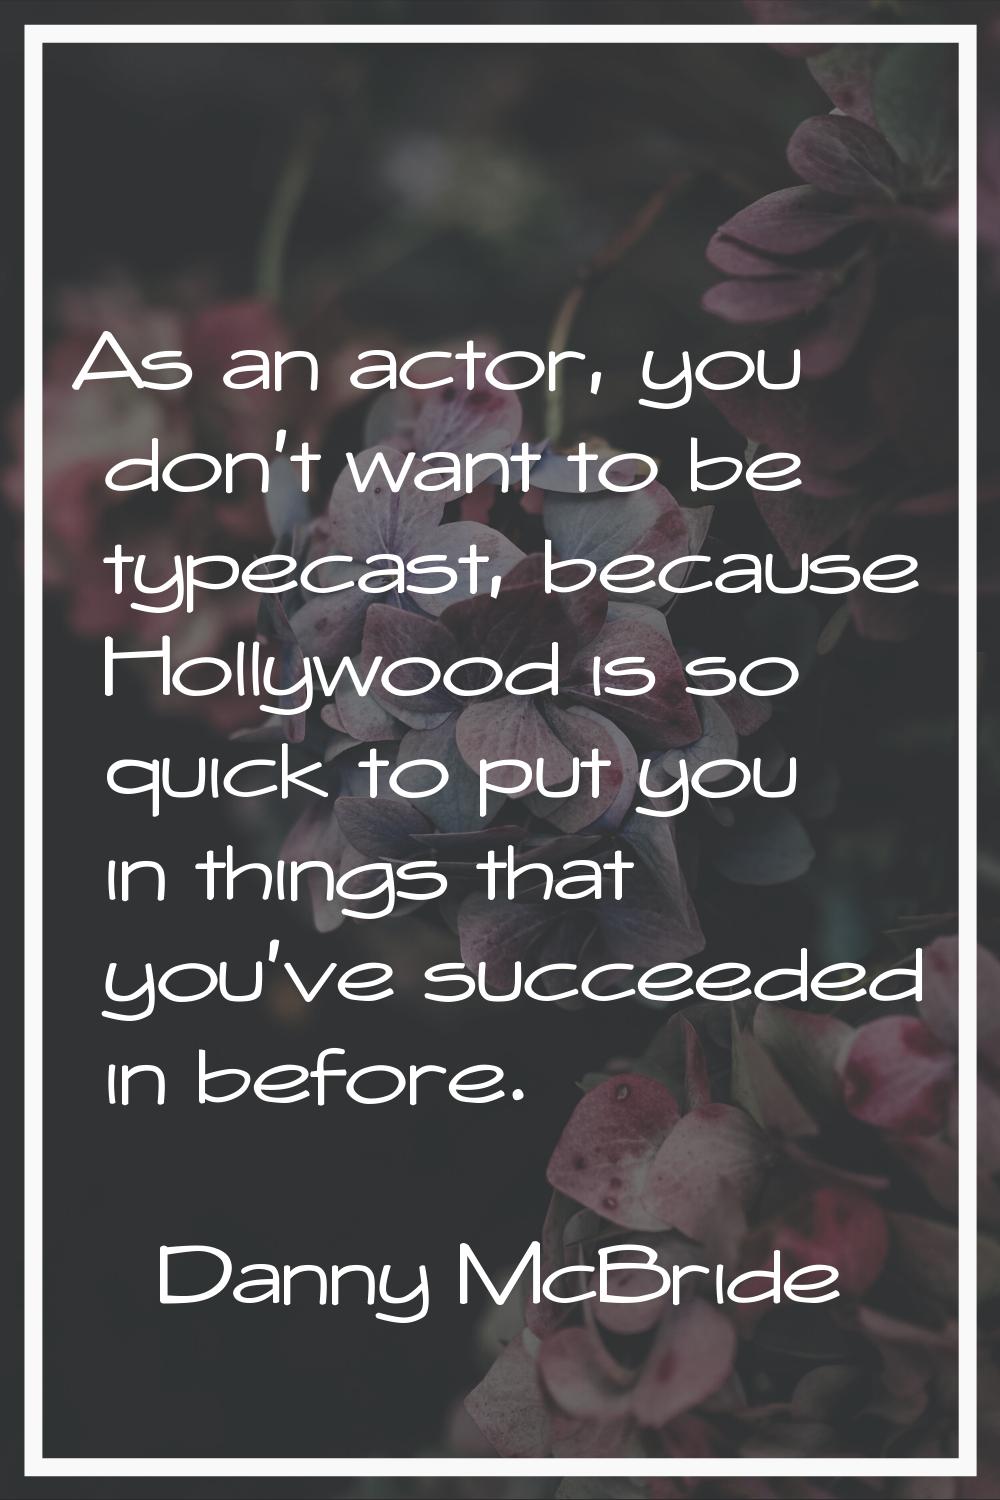 As an actor, you don't want to be typecast, because Hollywood is so quick to put you in things that